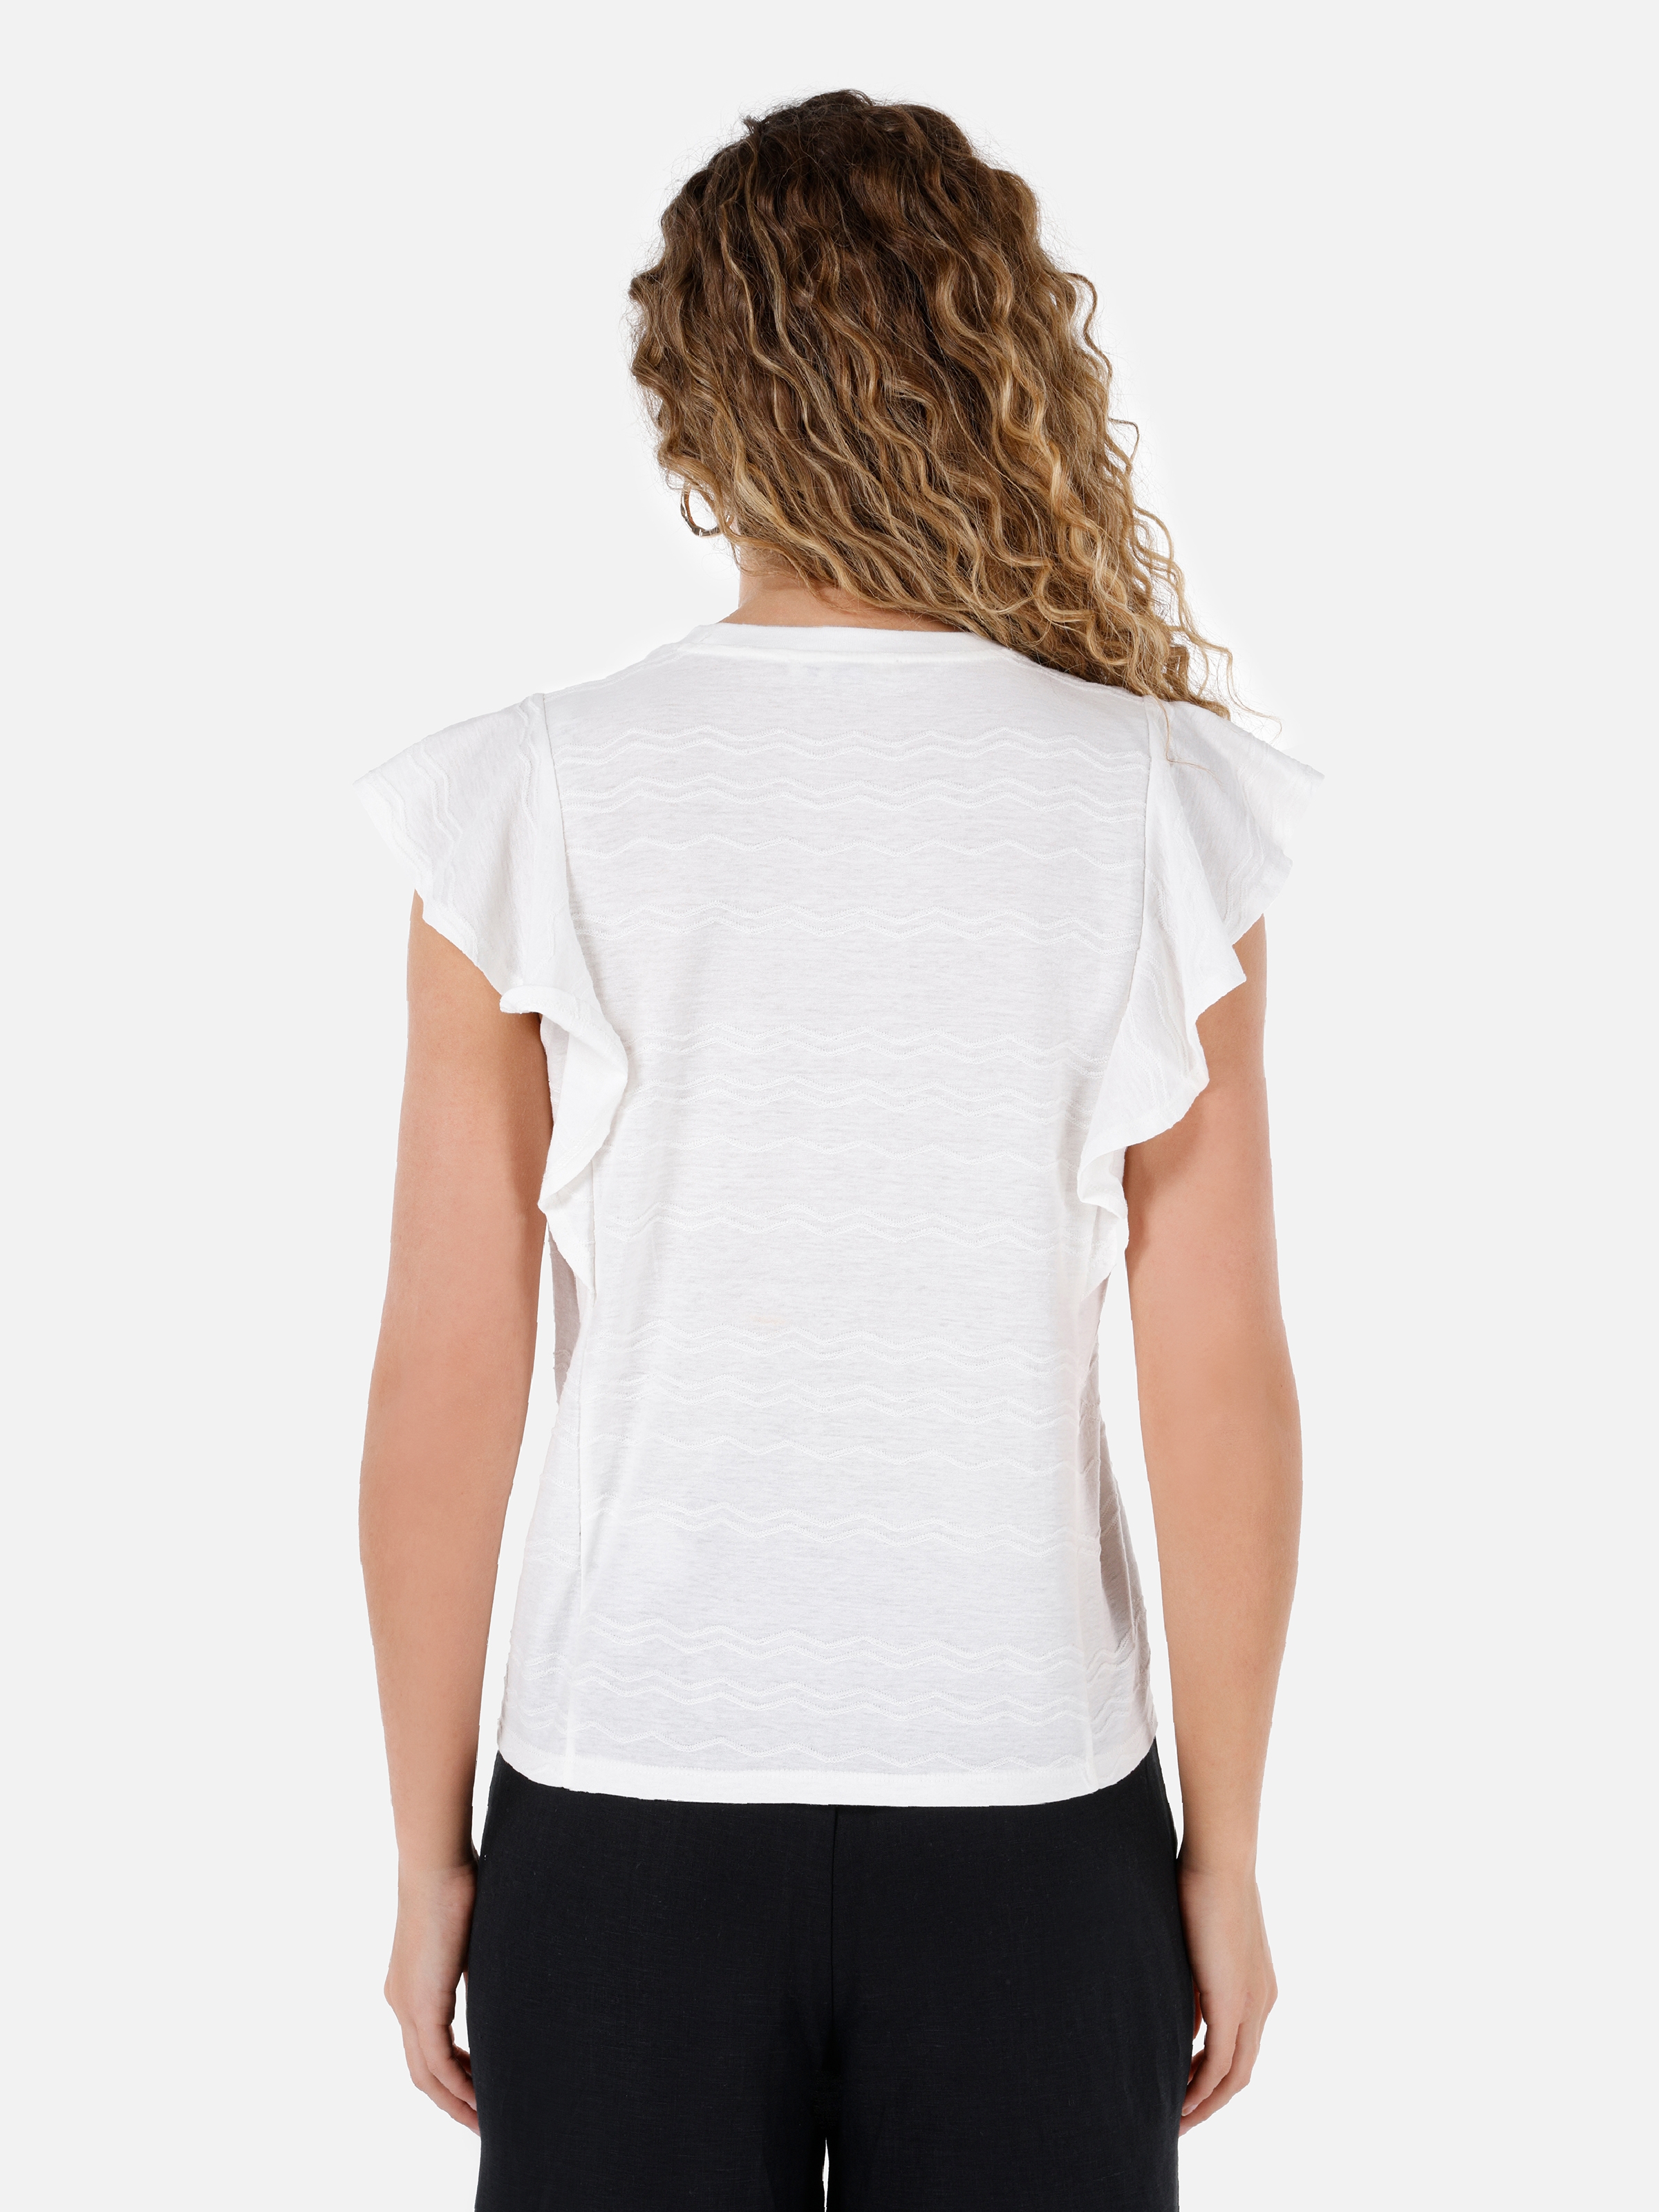 Show details for Whıte Woman Short Sleeve Tshirt